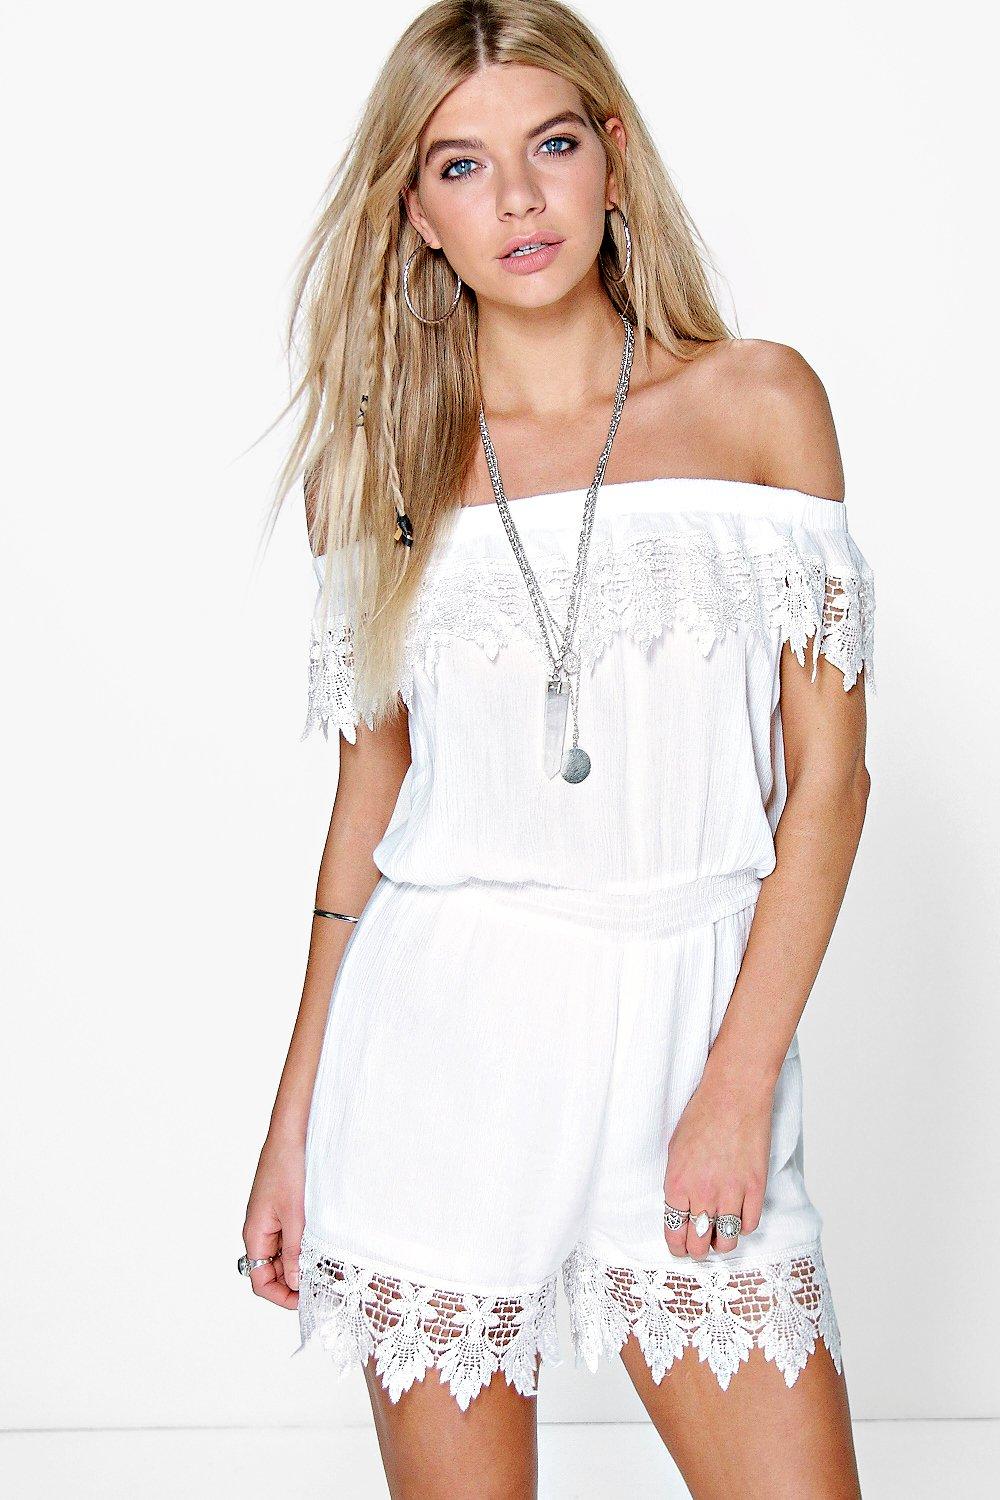 Sally Off The Shoulder Crochet Playsuit at boohoo.com